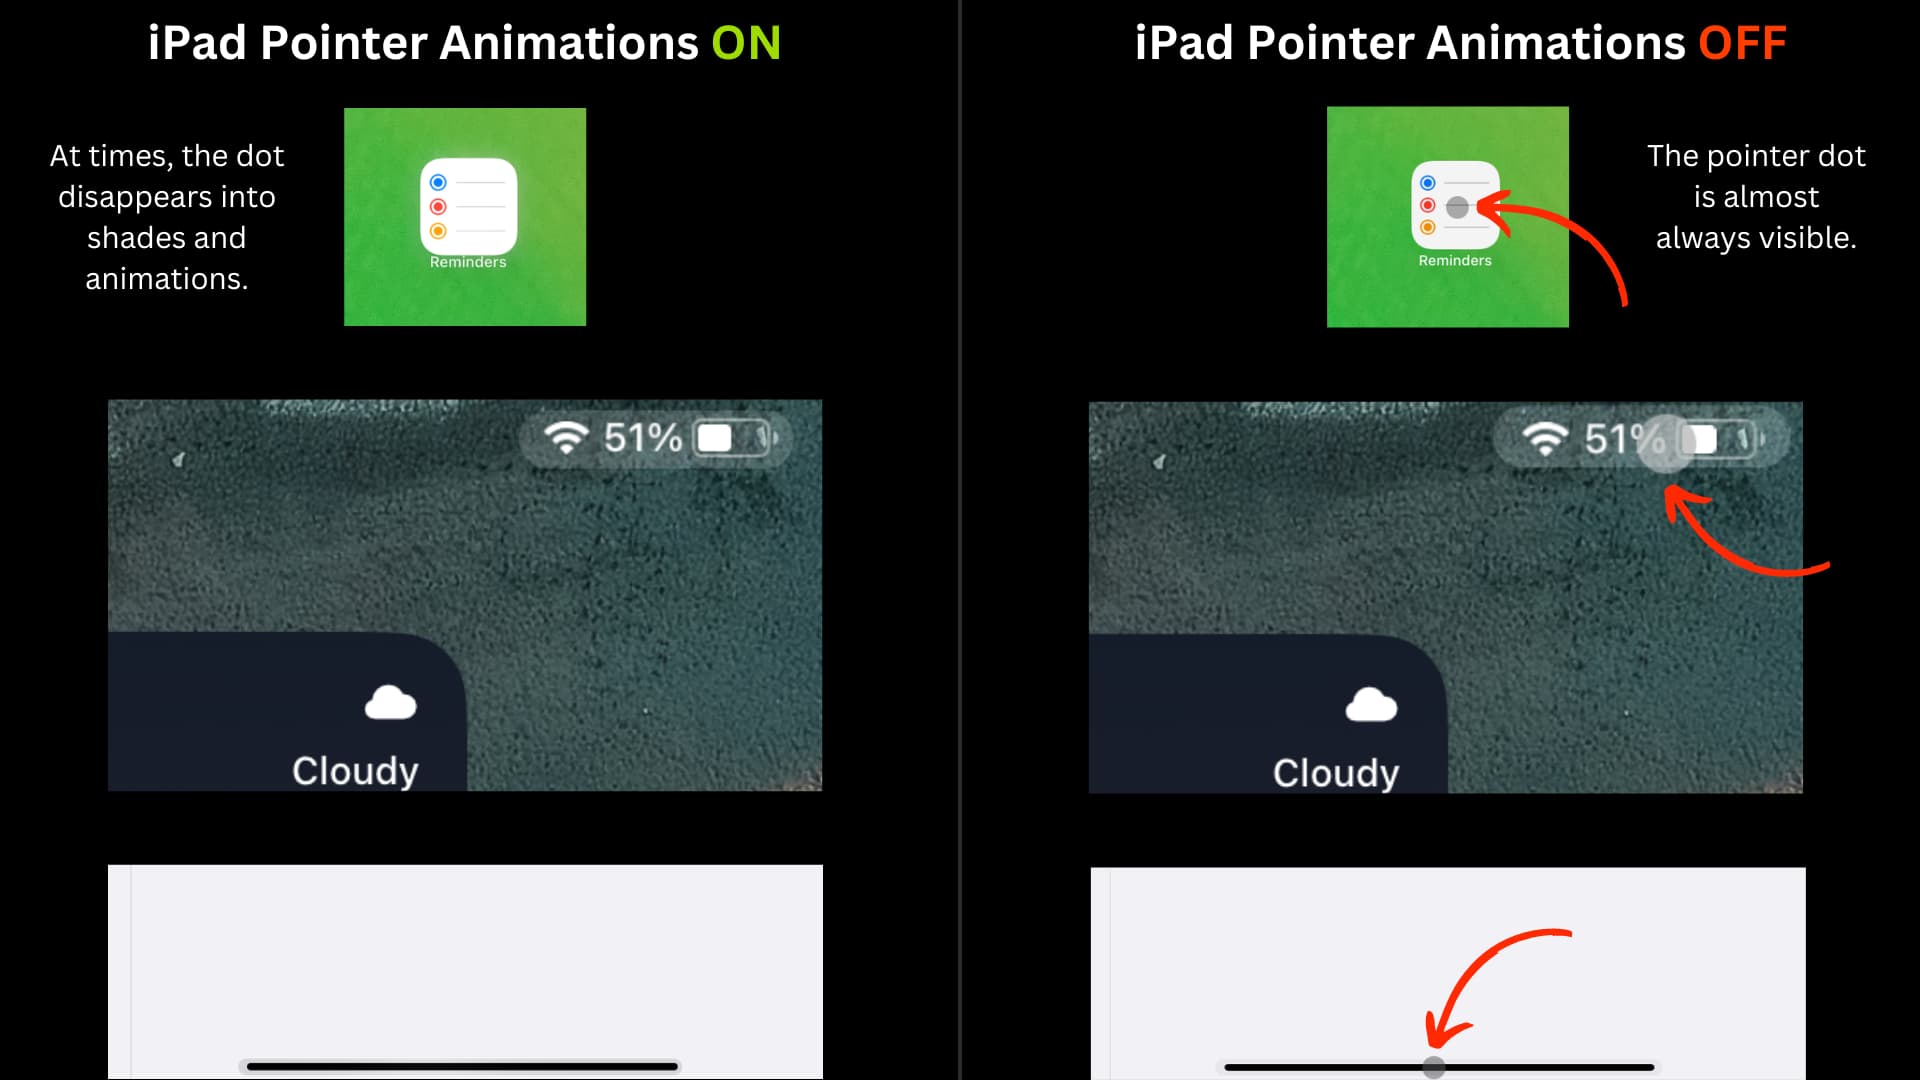 Comparison between iPad Pointer animations when on and when off